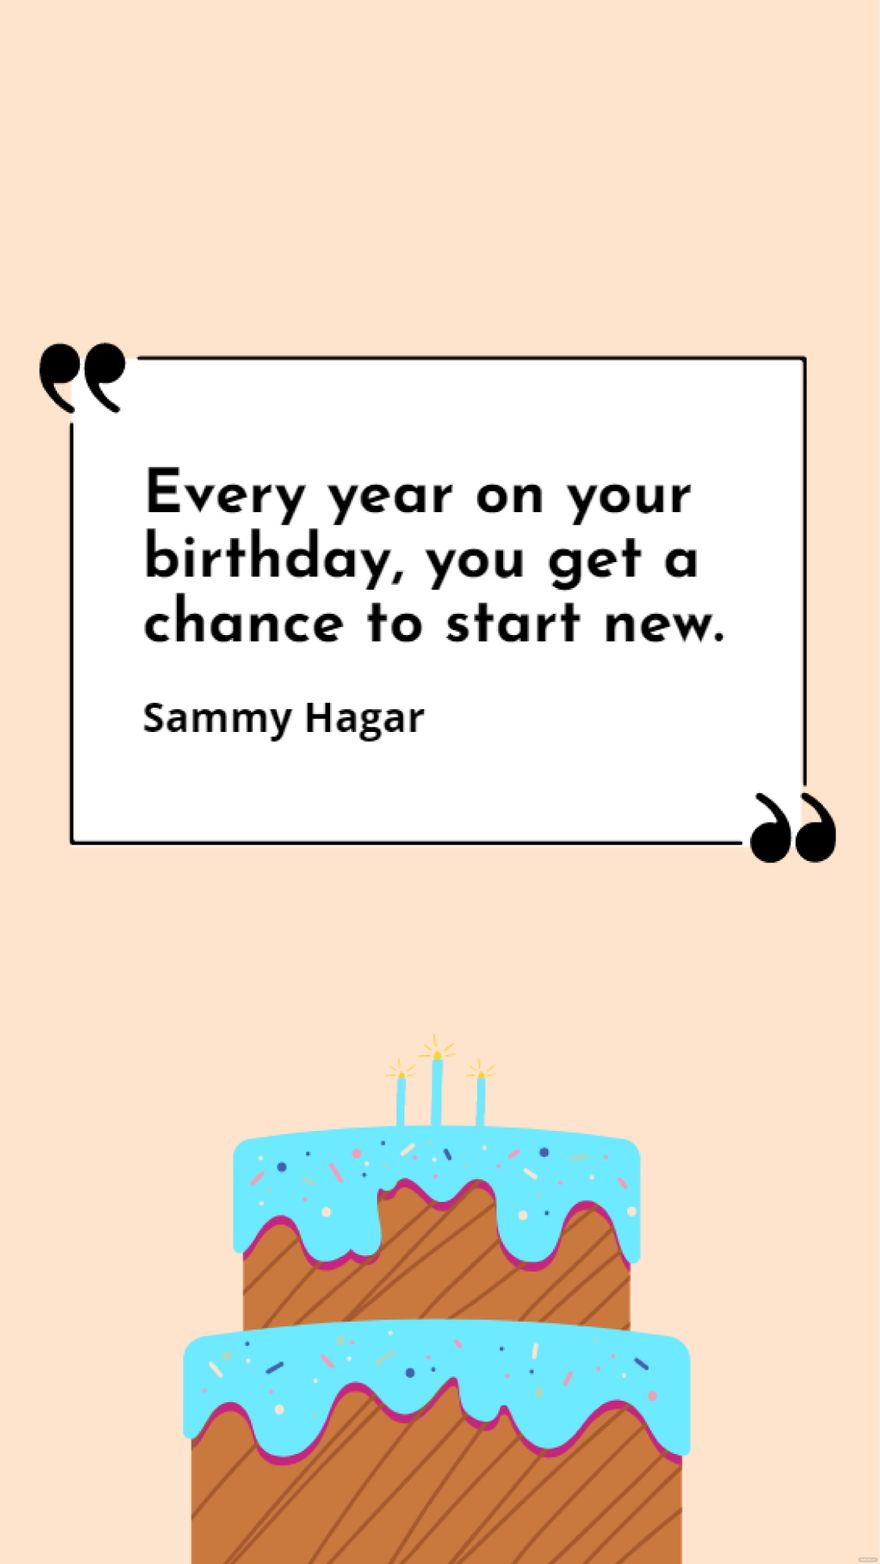 Sammy Hagar - Every year on your birthday, you get a chance to start new. in JPG